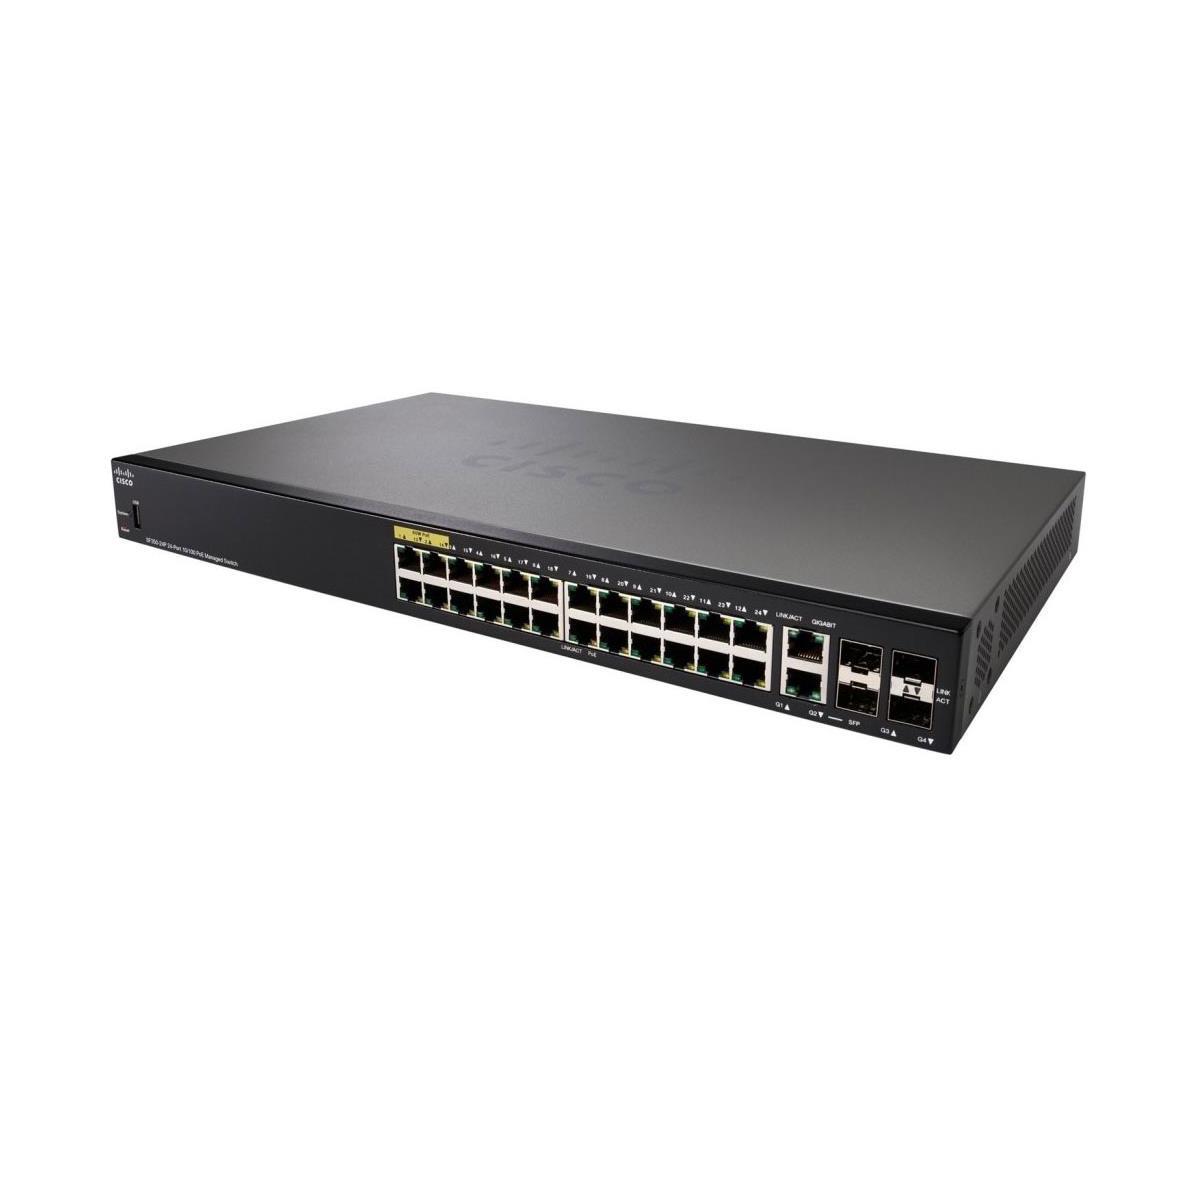 Image of Cisco SF350-24P 24-Port 10/100 POE Managed Switch